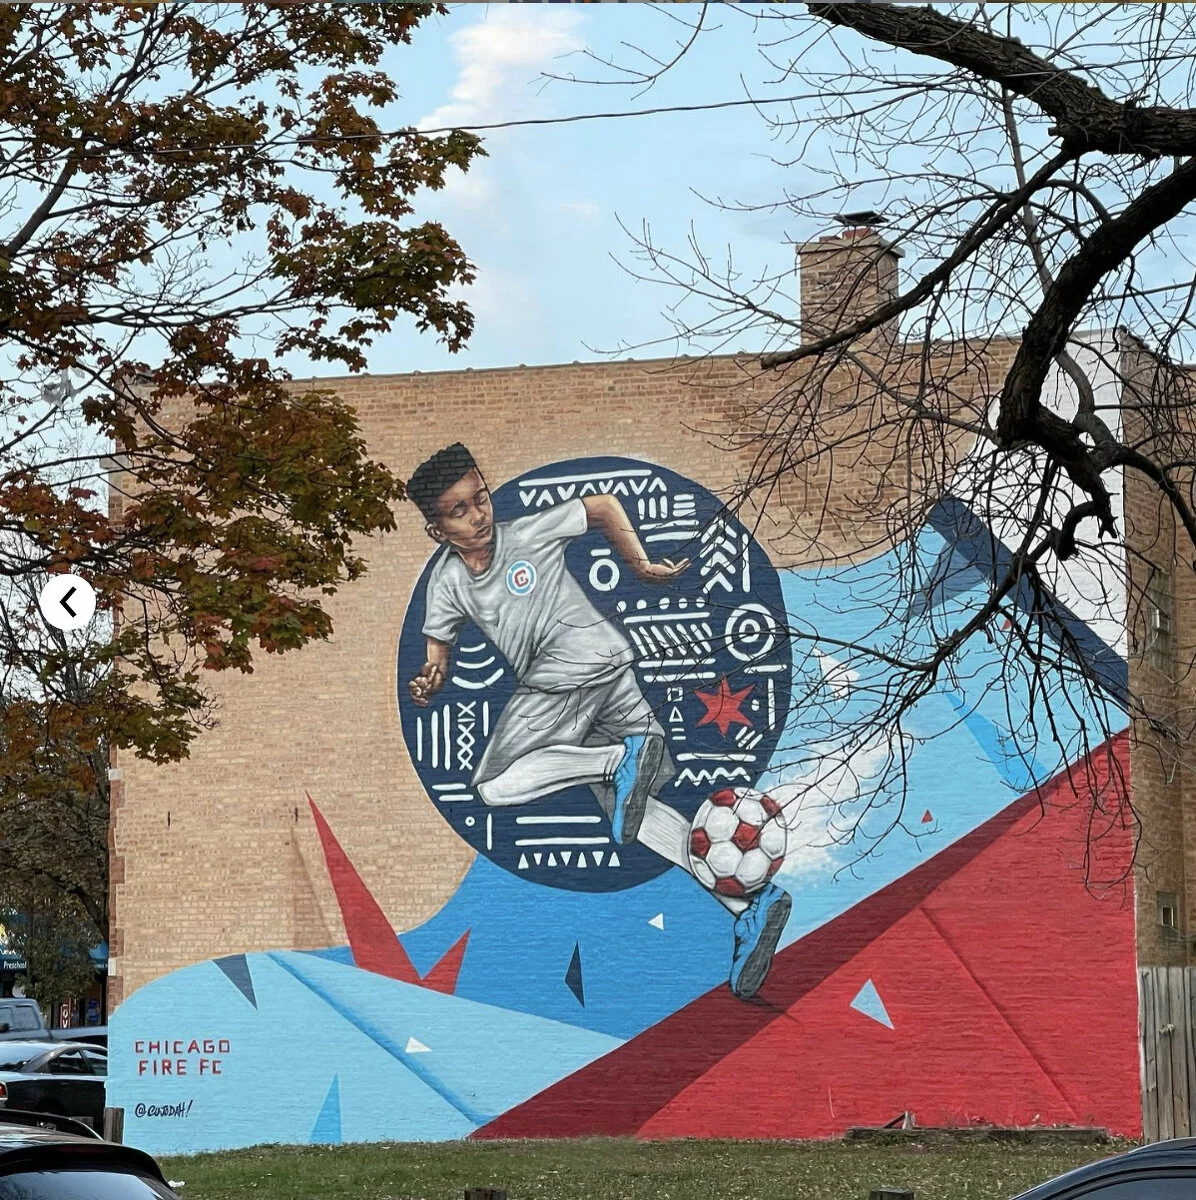 Mural on a brick wall outdoors. It features a young, black male wearing a Chicago Fire FC uniform and kicking a soccer ball. The background consists of a large black circle with linear symbols as well as blue and red bands of color—perhaps a deconstructed version of the Chicago Fire's club logo.